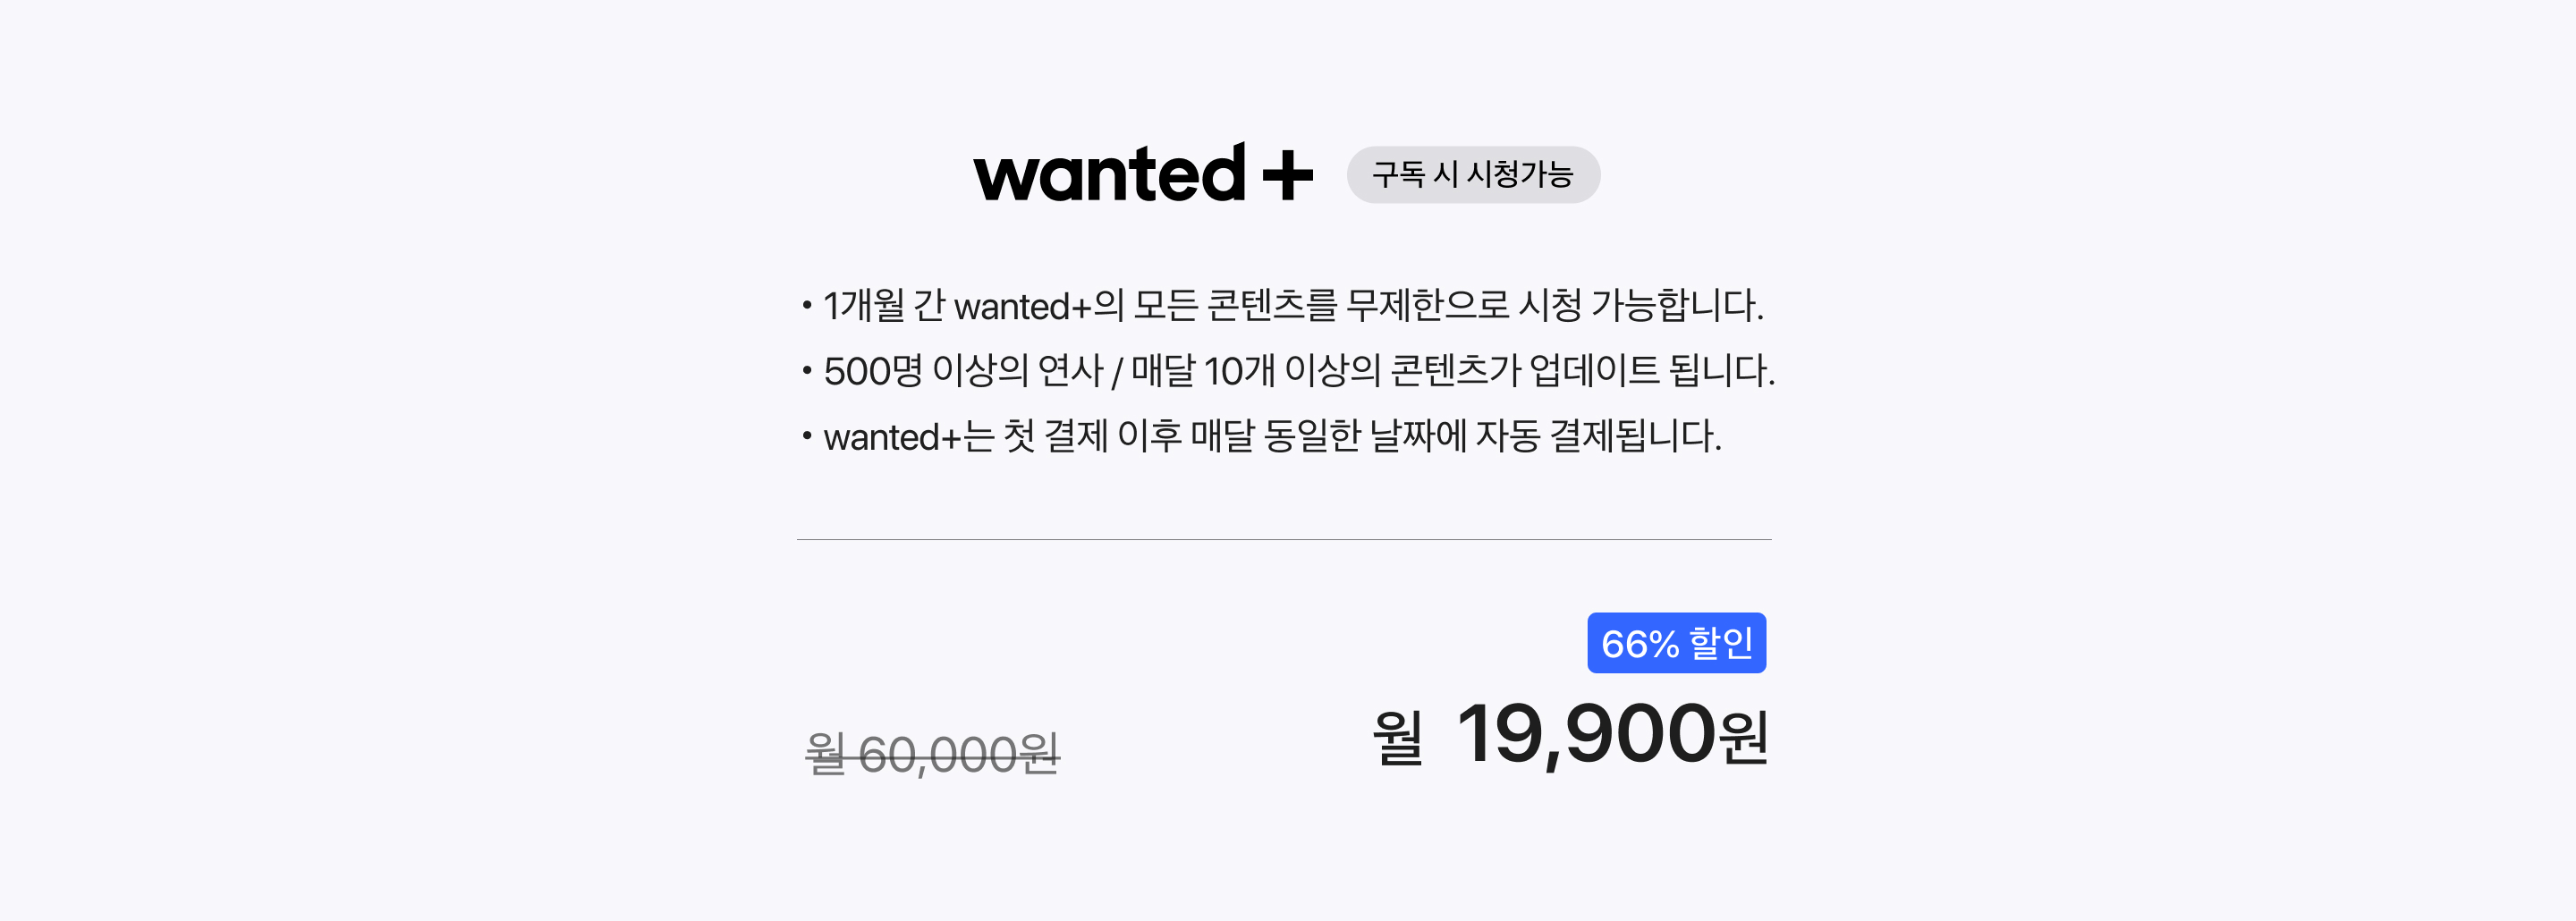 https://static.wanted.co.kr/images/events/1304/fbf8944a.jpg